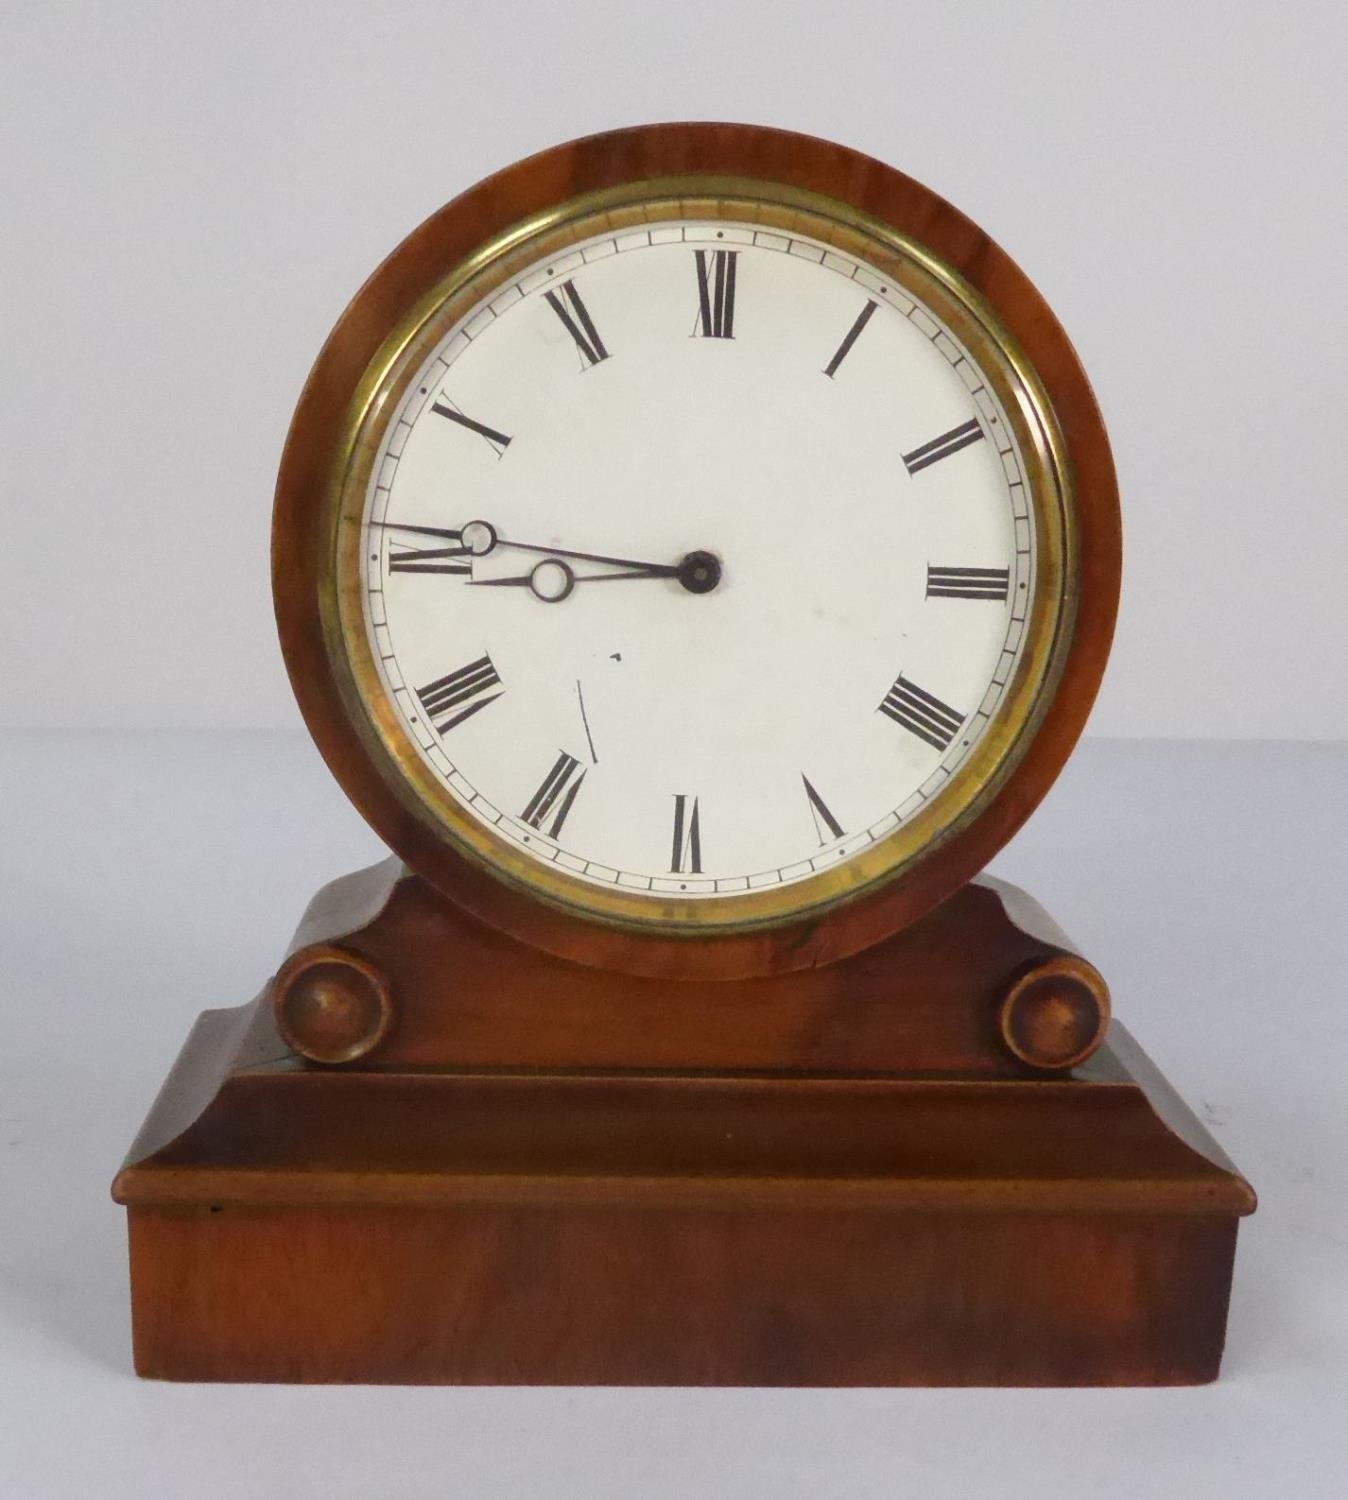 NINETEENTH CENTURY FRENCH WALNUT CASED SMALL MANTLE CLOCK, the 3 ½” Roman dial, powered by a drum